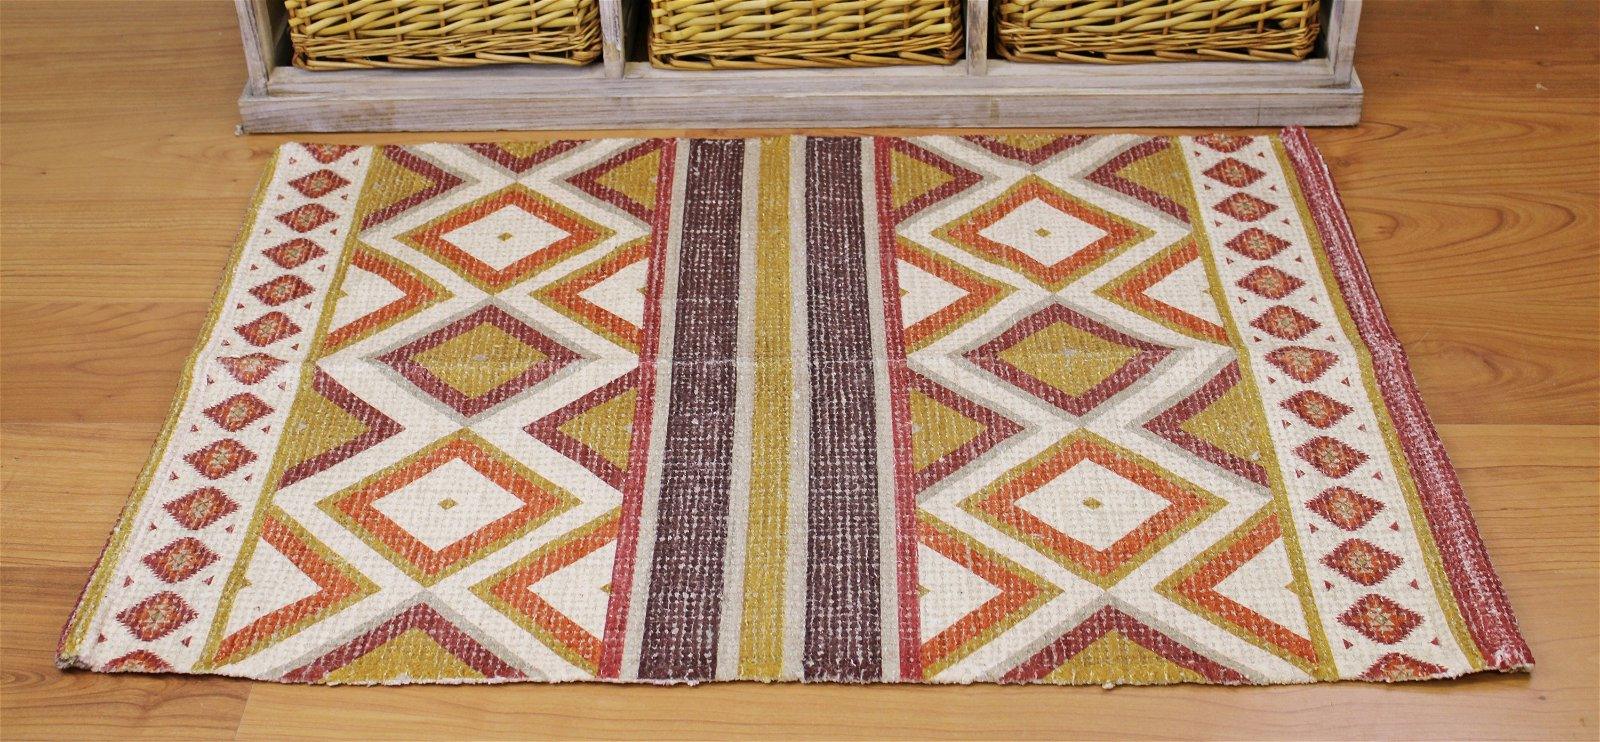 Moroccan Inspired Kasbah Rug, Diamonds and Stripes, 60x90cm - £38.99 - Rugs 